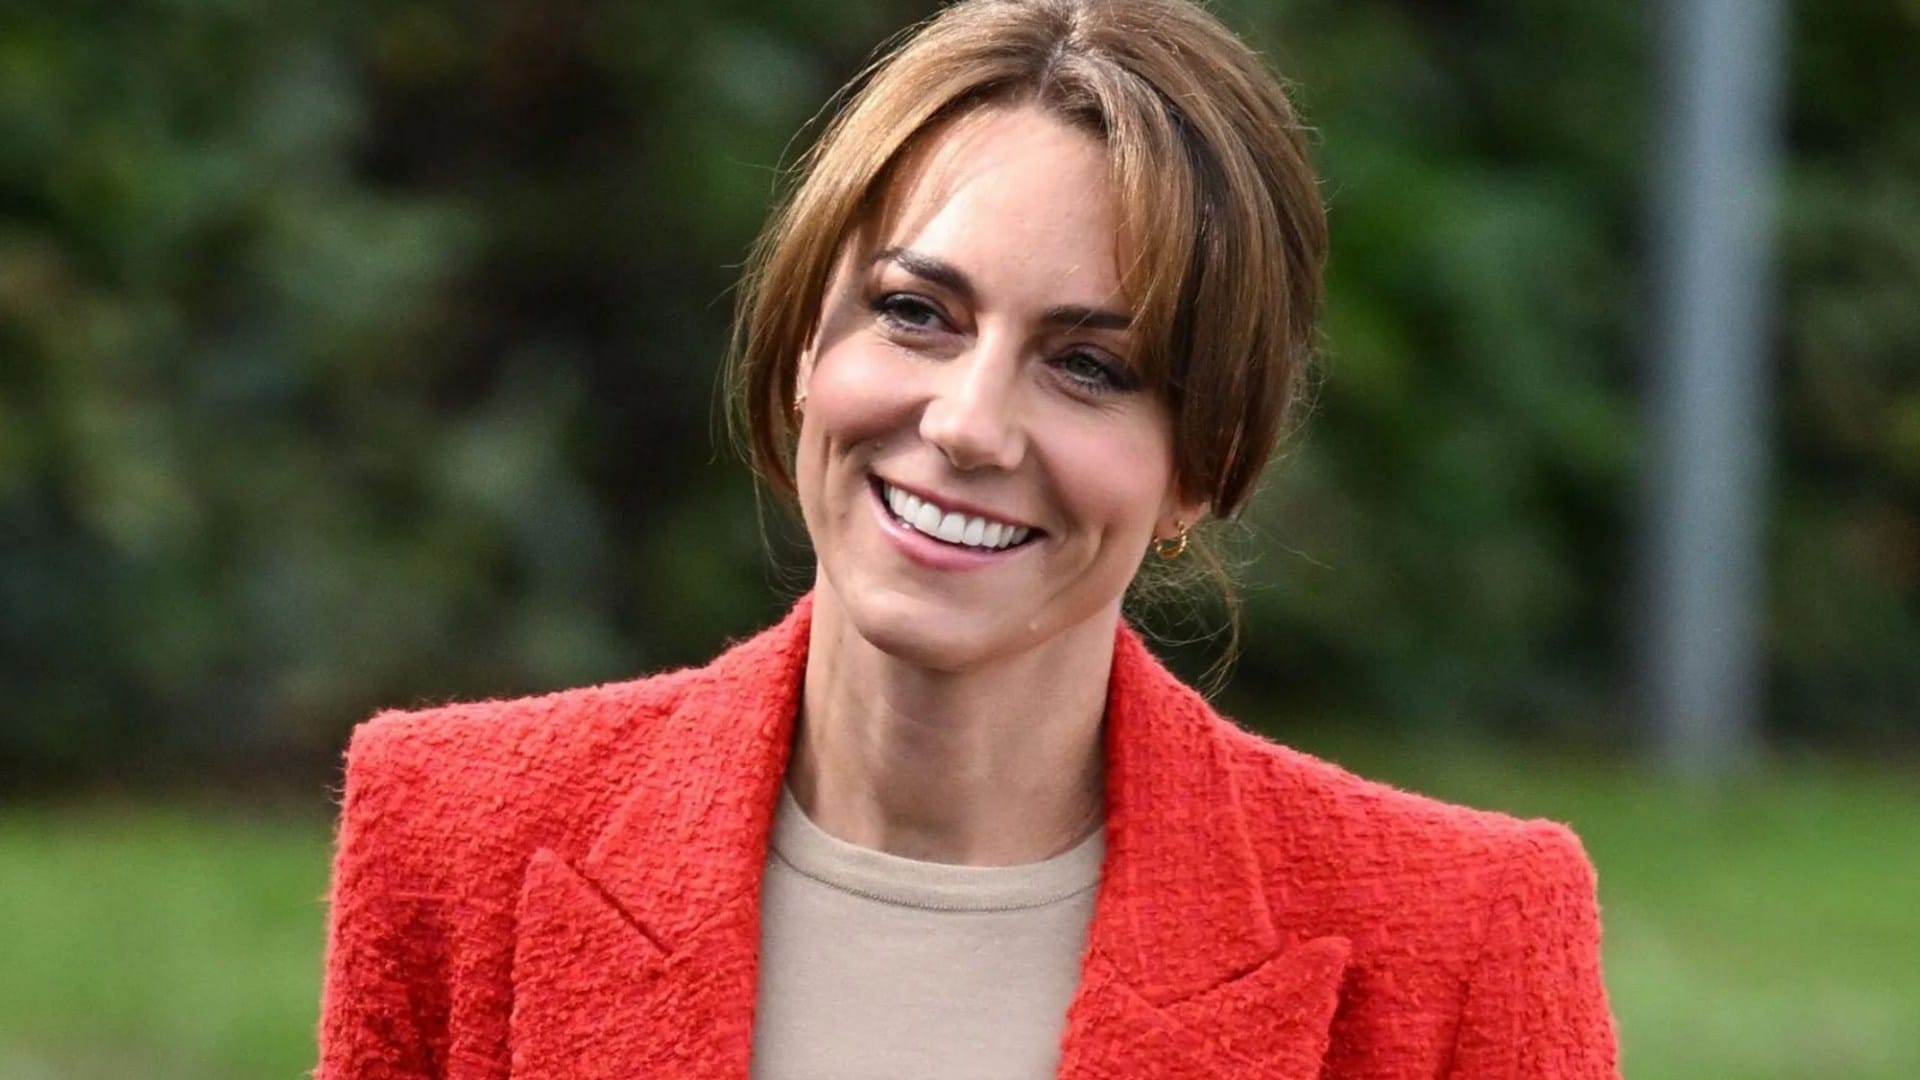 'Happy and healthy' Princess Kate spotted out and about for first time since surgery as she visits farm shop with Wills